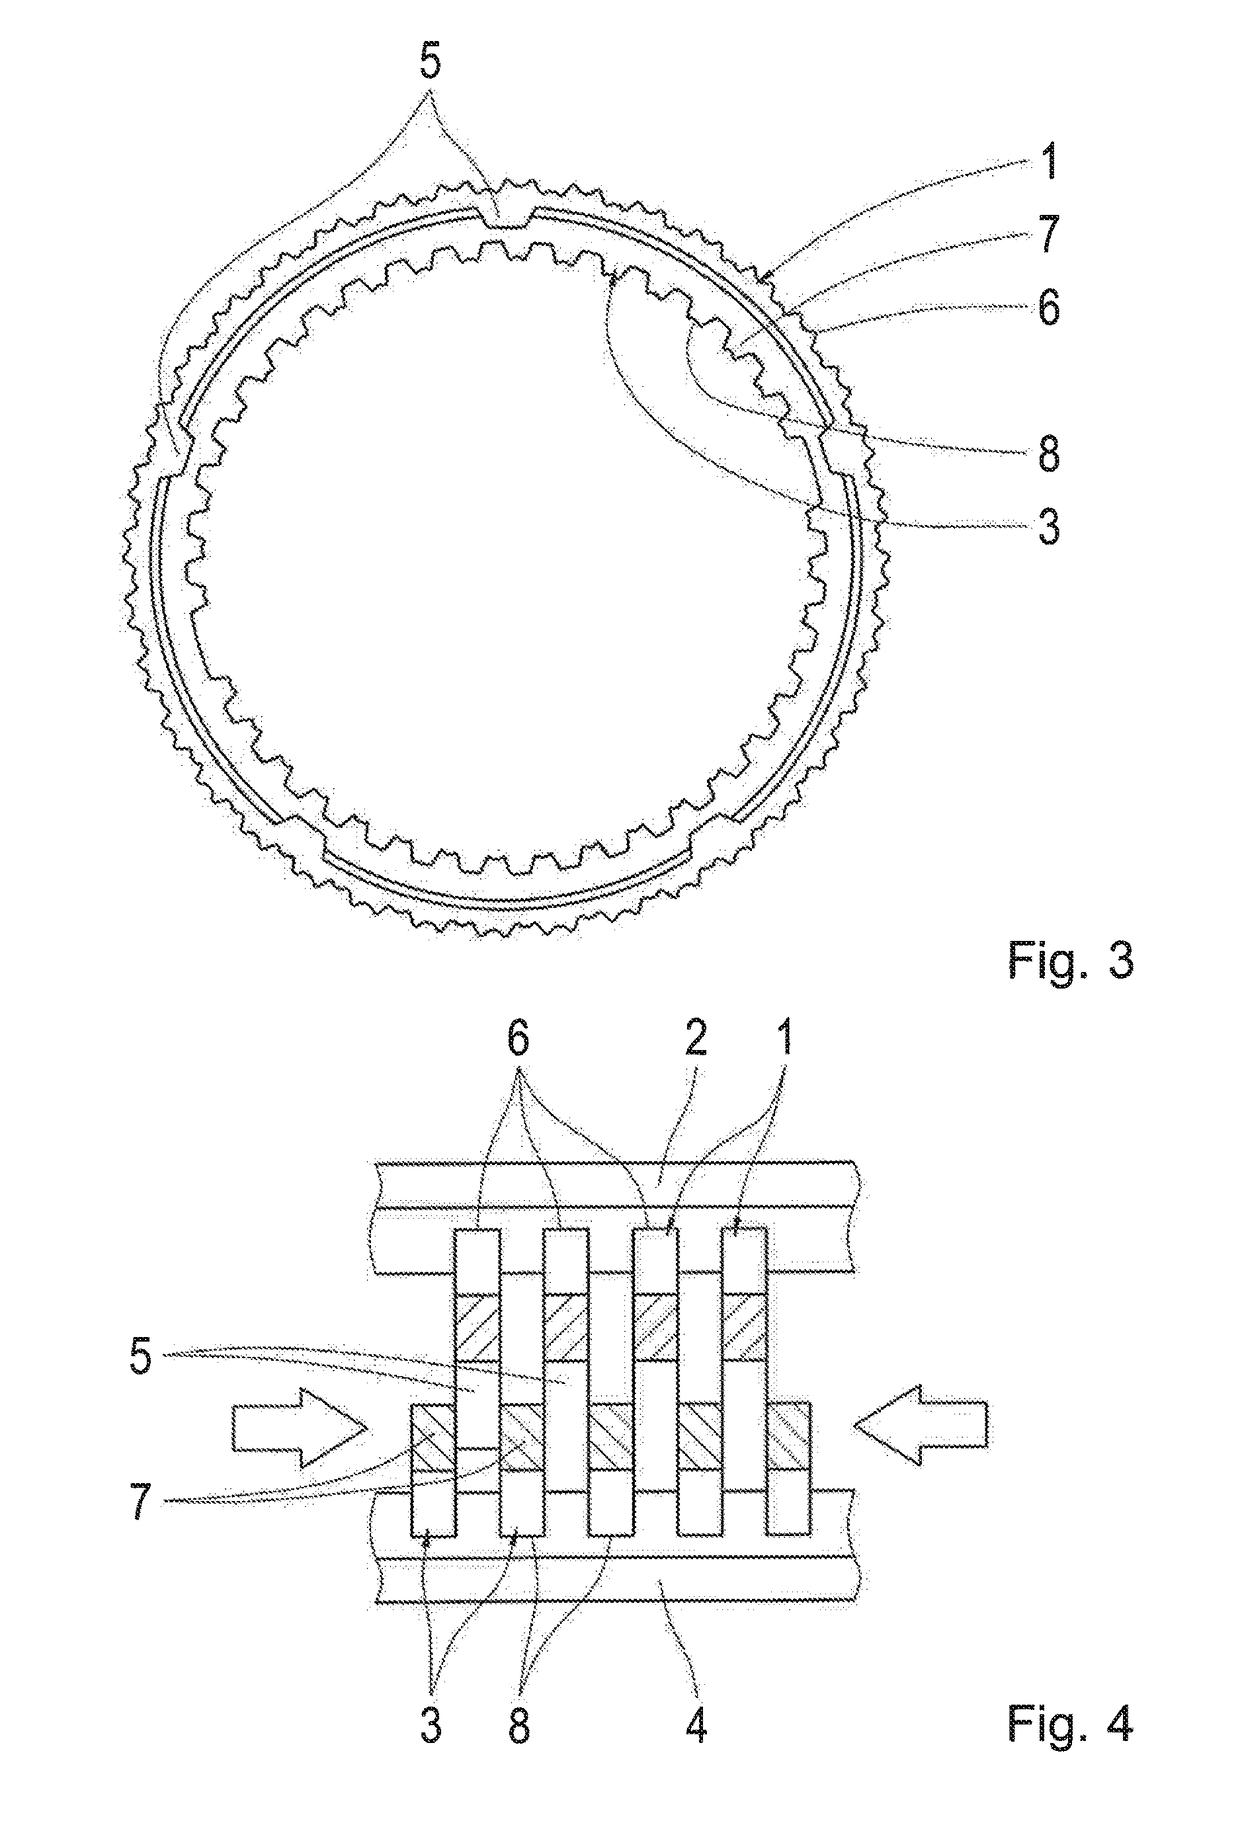 Frictional shifting element for a vehicle transmission